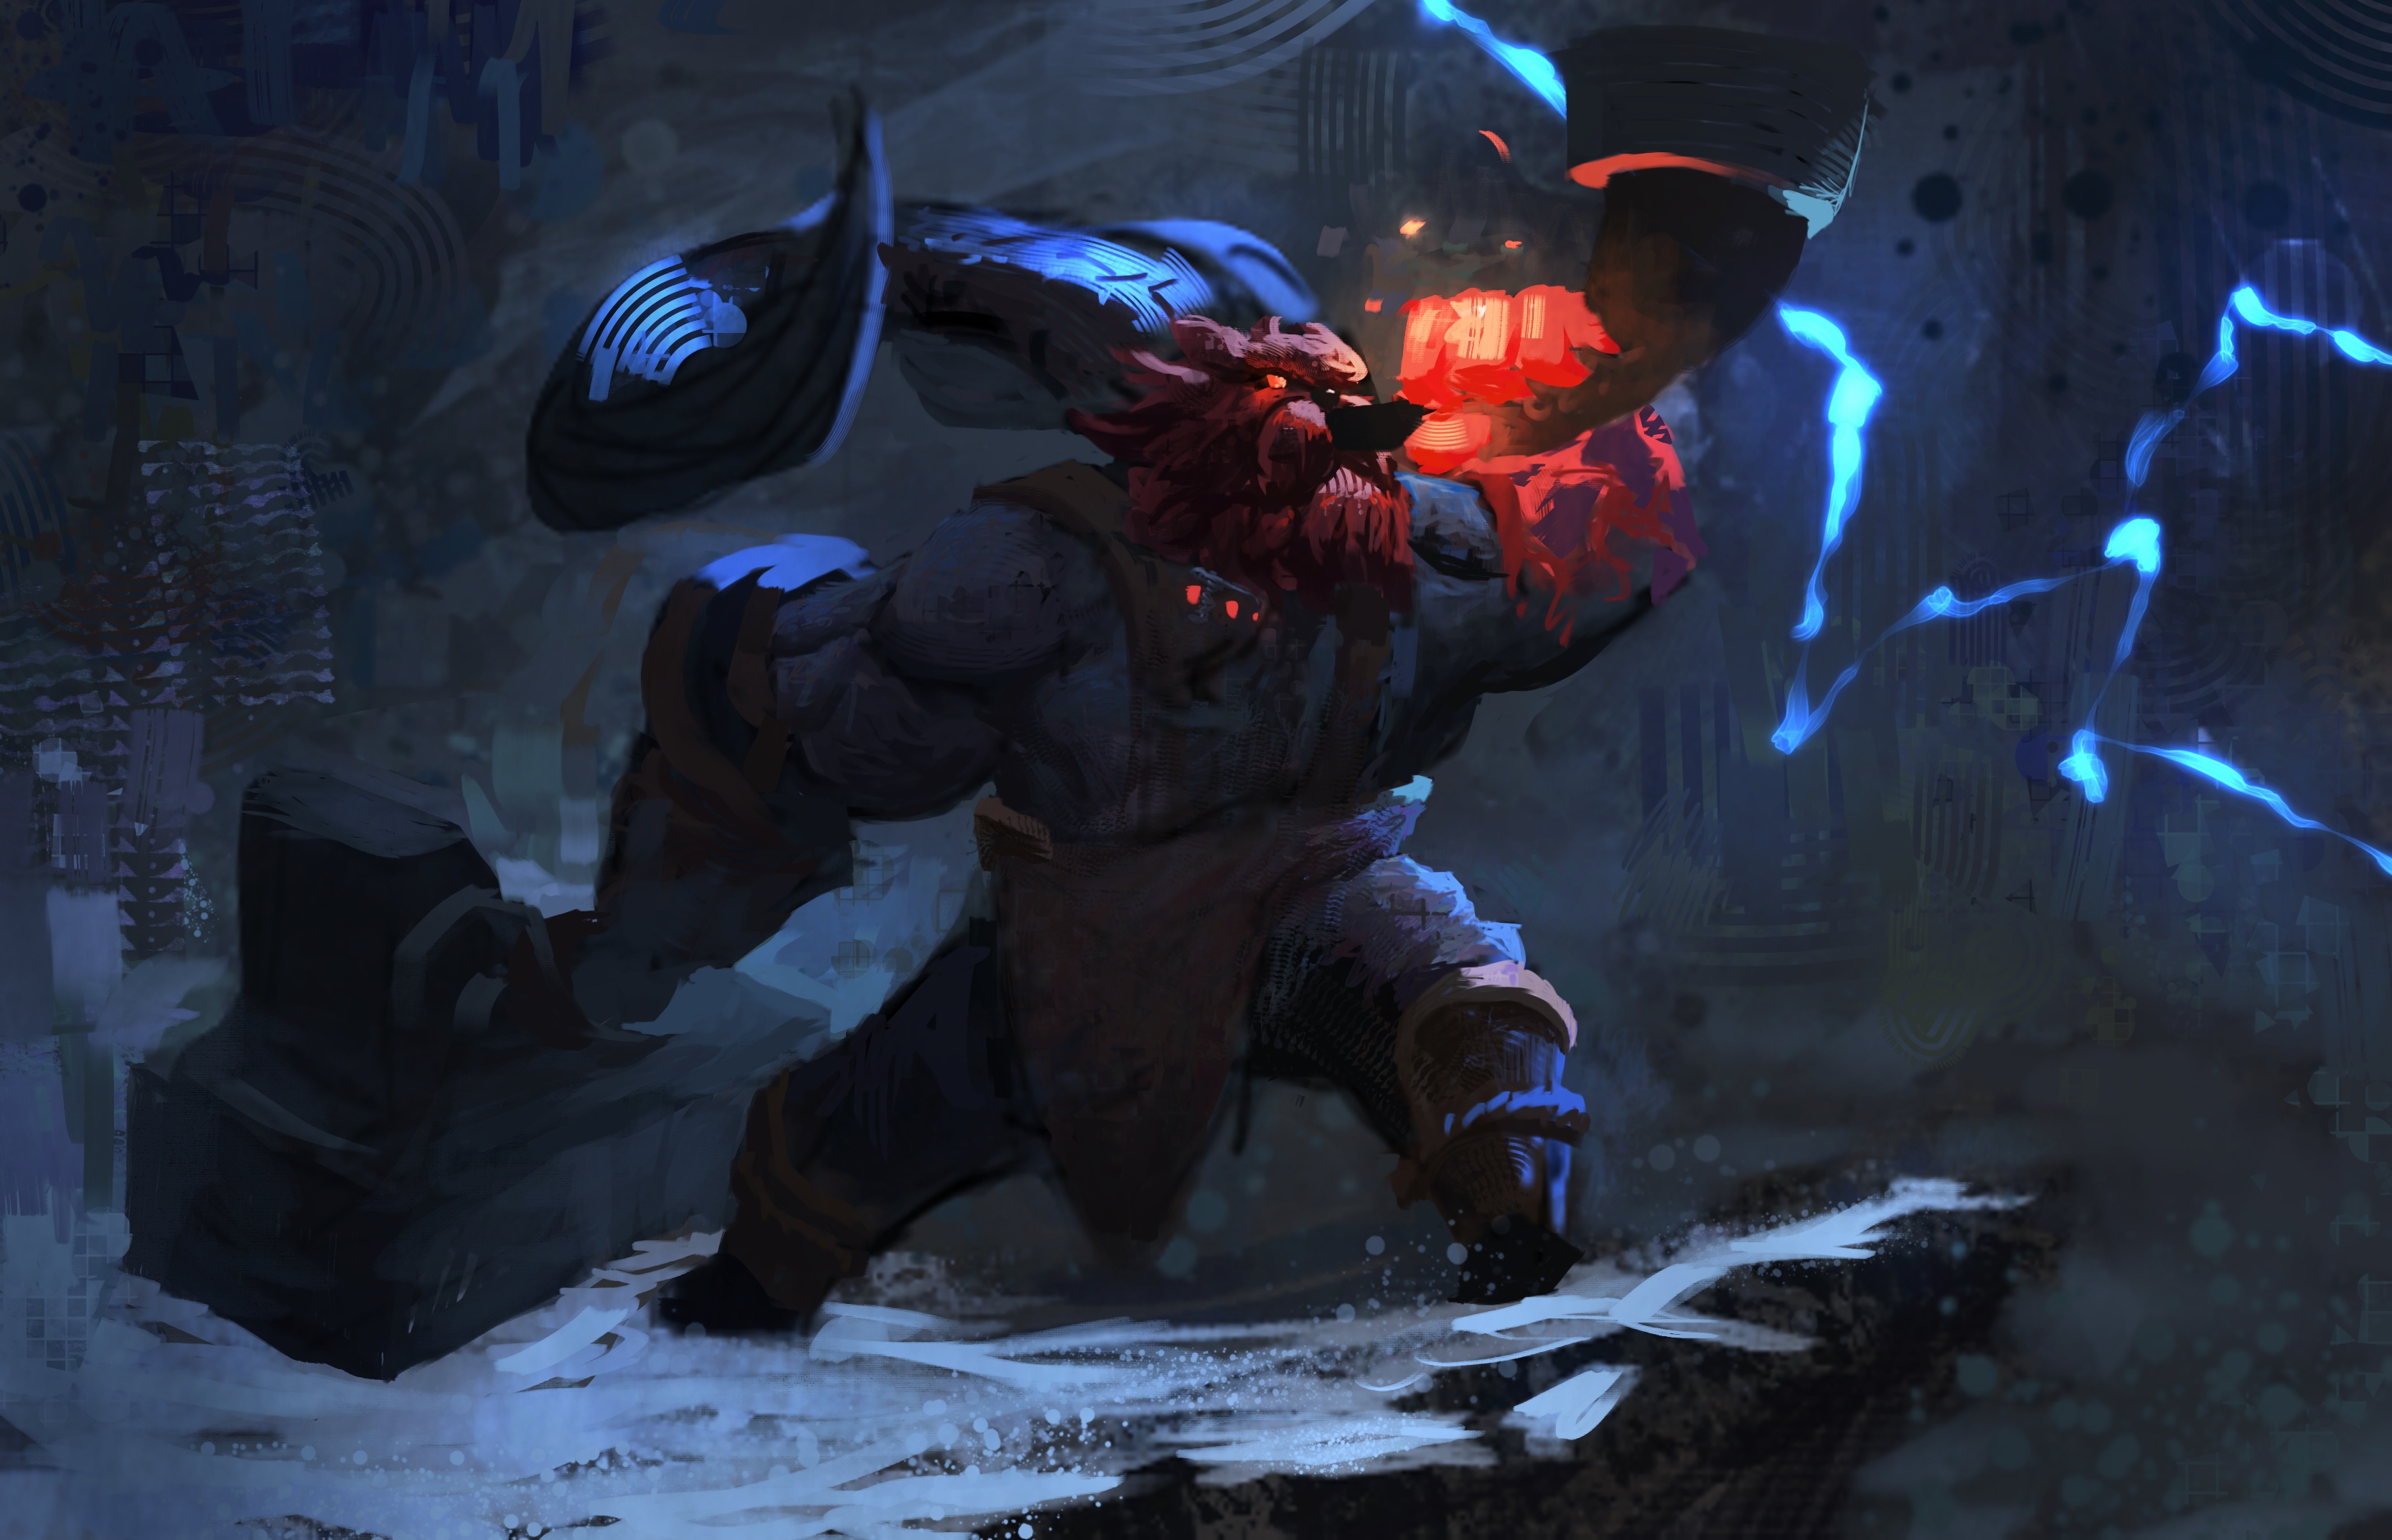 Ornn League Of Legends HD Wallpaper And Background